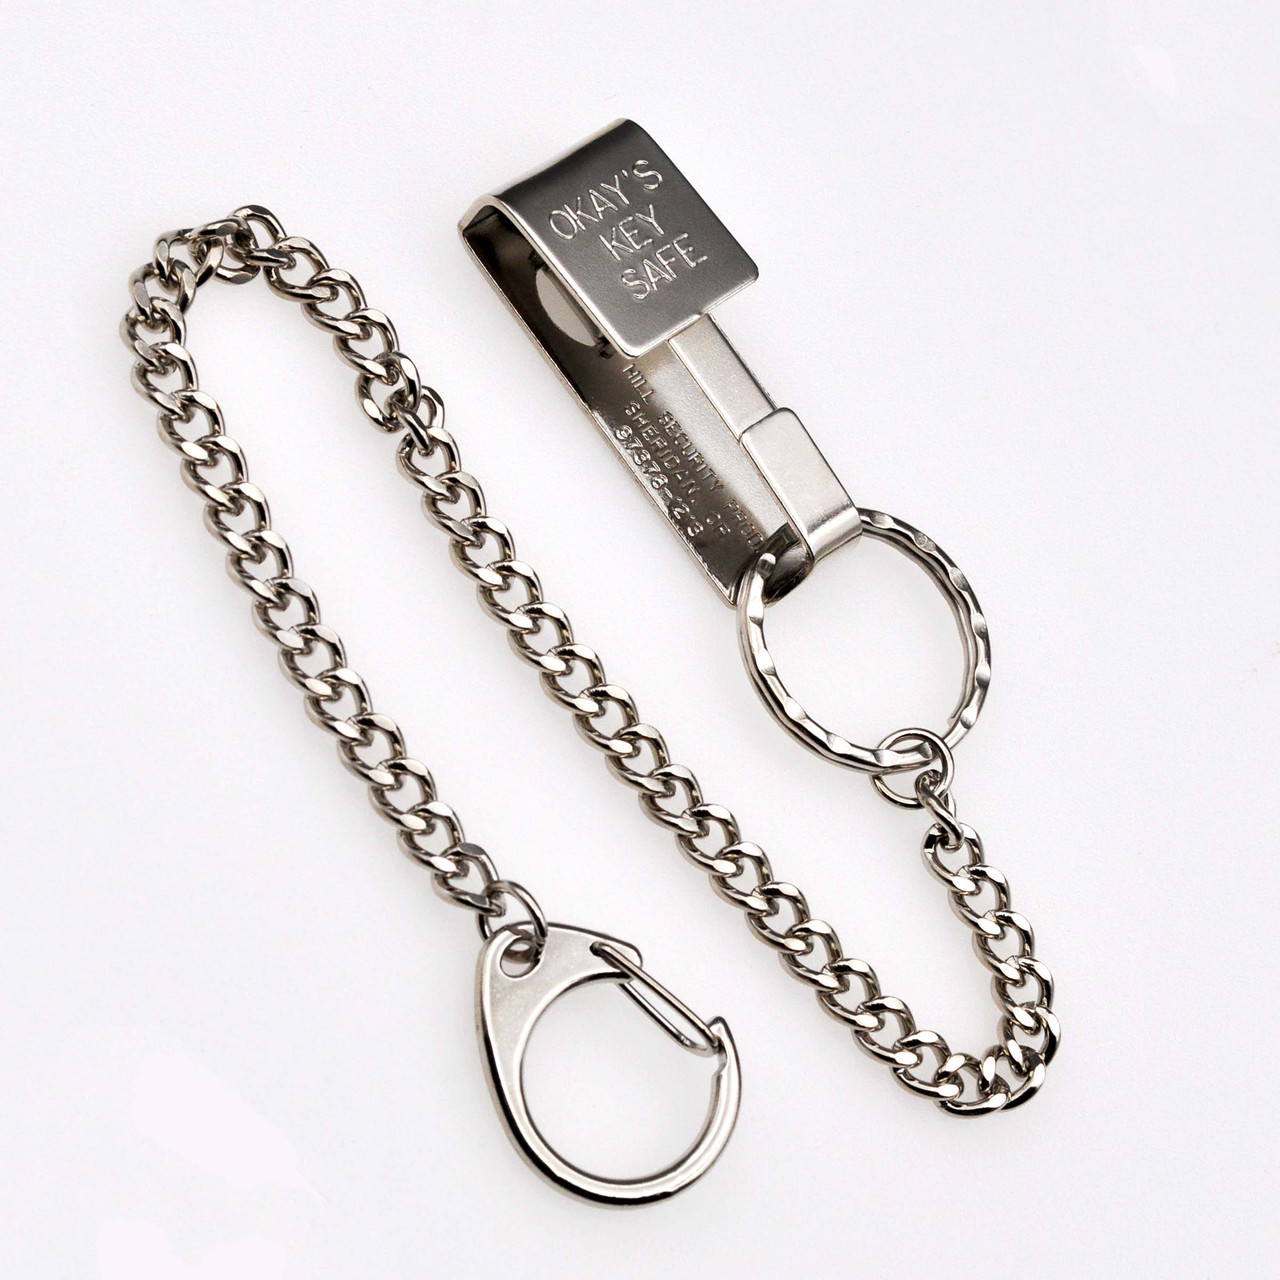 Shop for and Buy Heavy Duty Double End Snap Clip Key Ring Nickel Plated  with Chain at . Large selection and bulk discounts available.